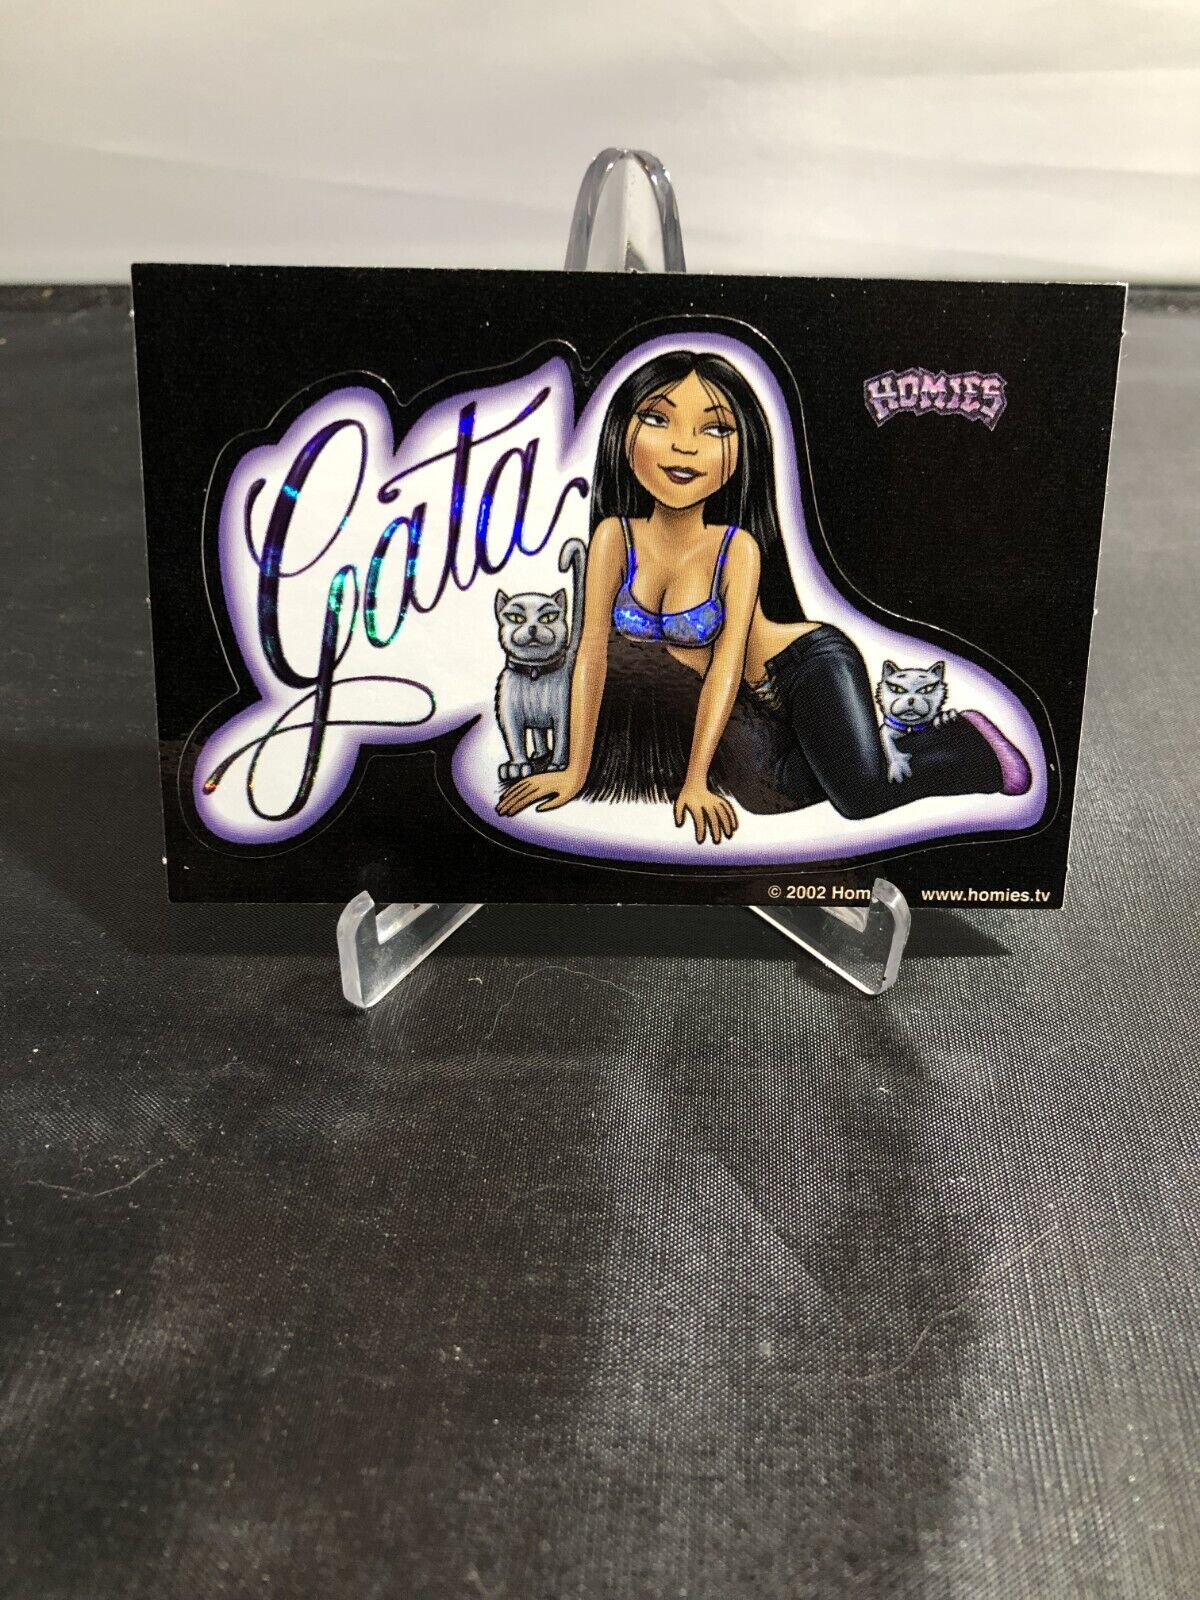 Vintage 2002 Homies Calender Pin Girl-Up New Sticker - You Choose